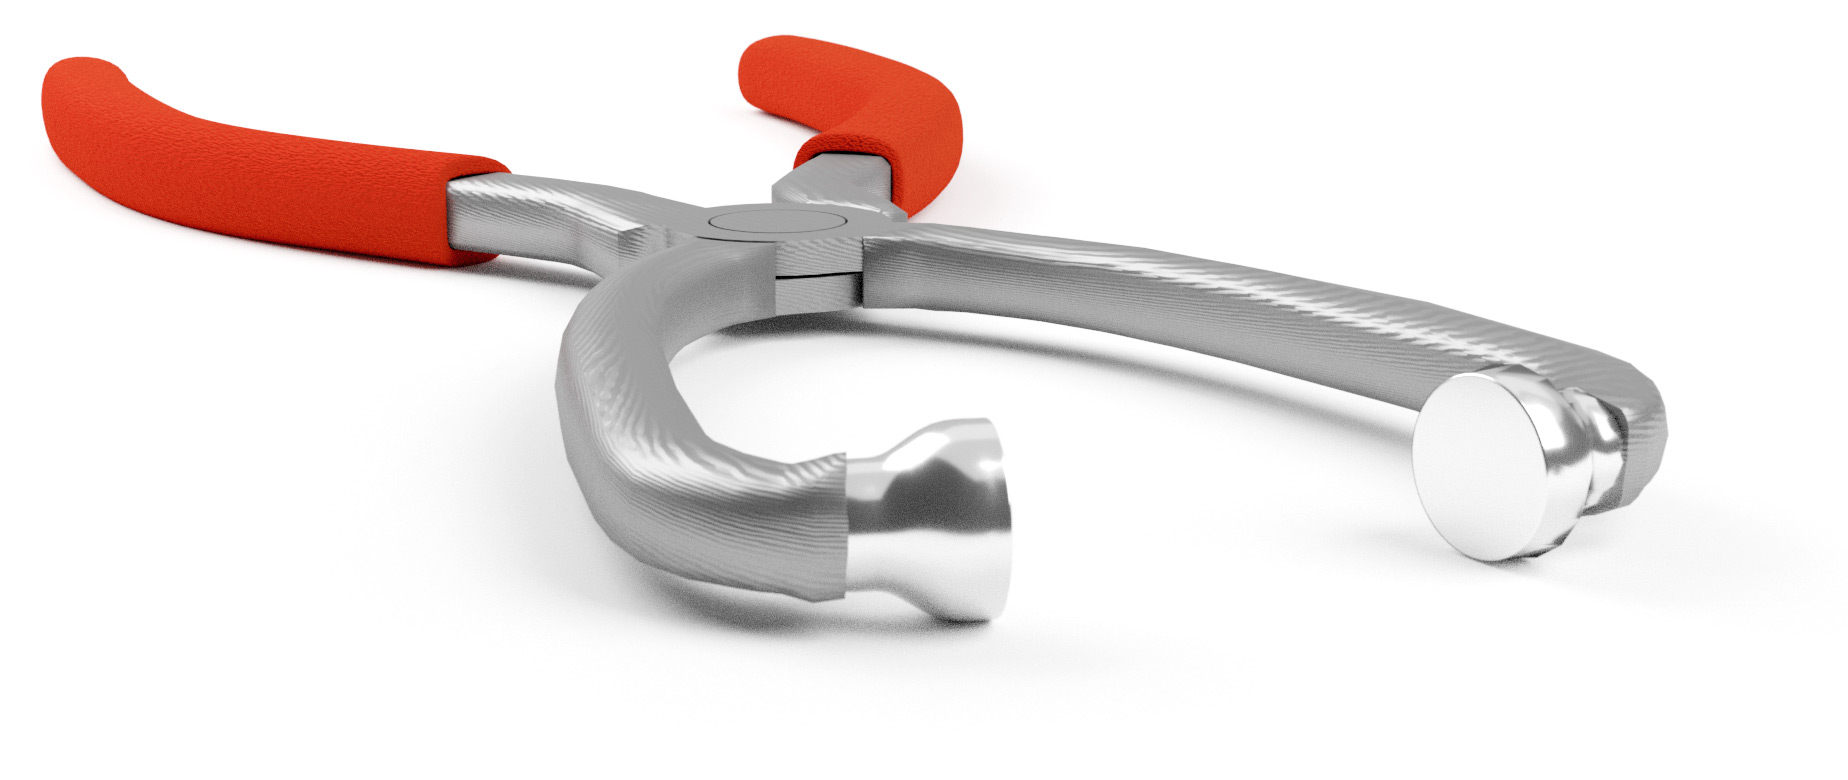 Render of the bubblewrap popping assistance tool